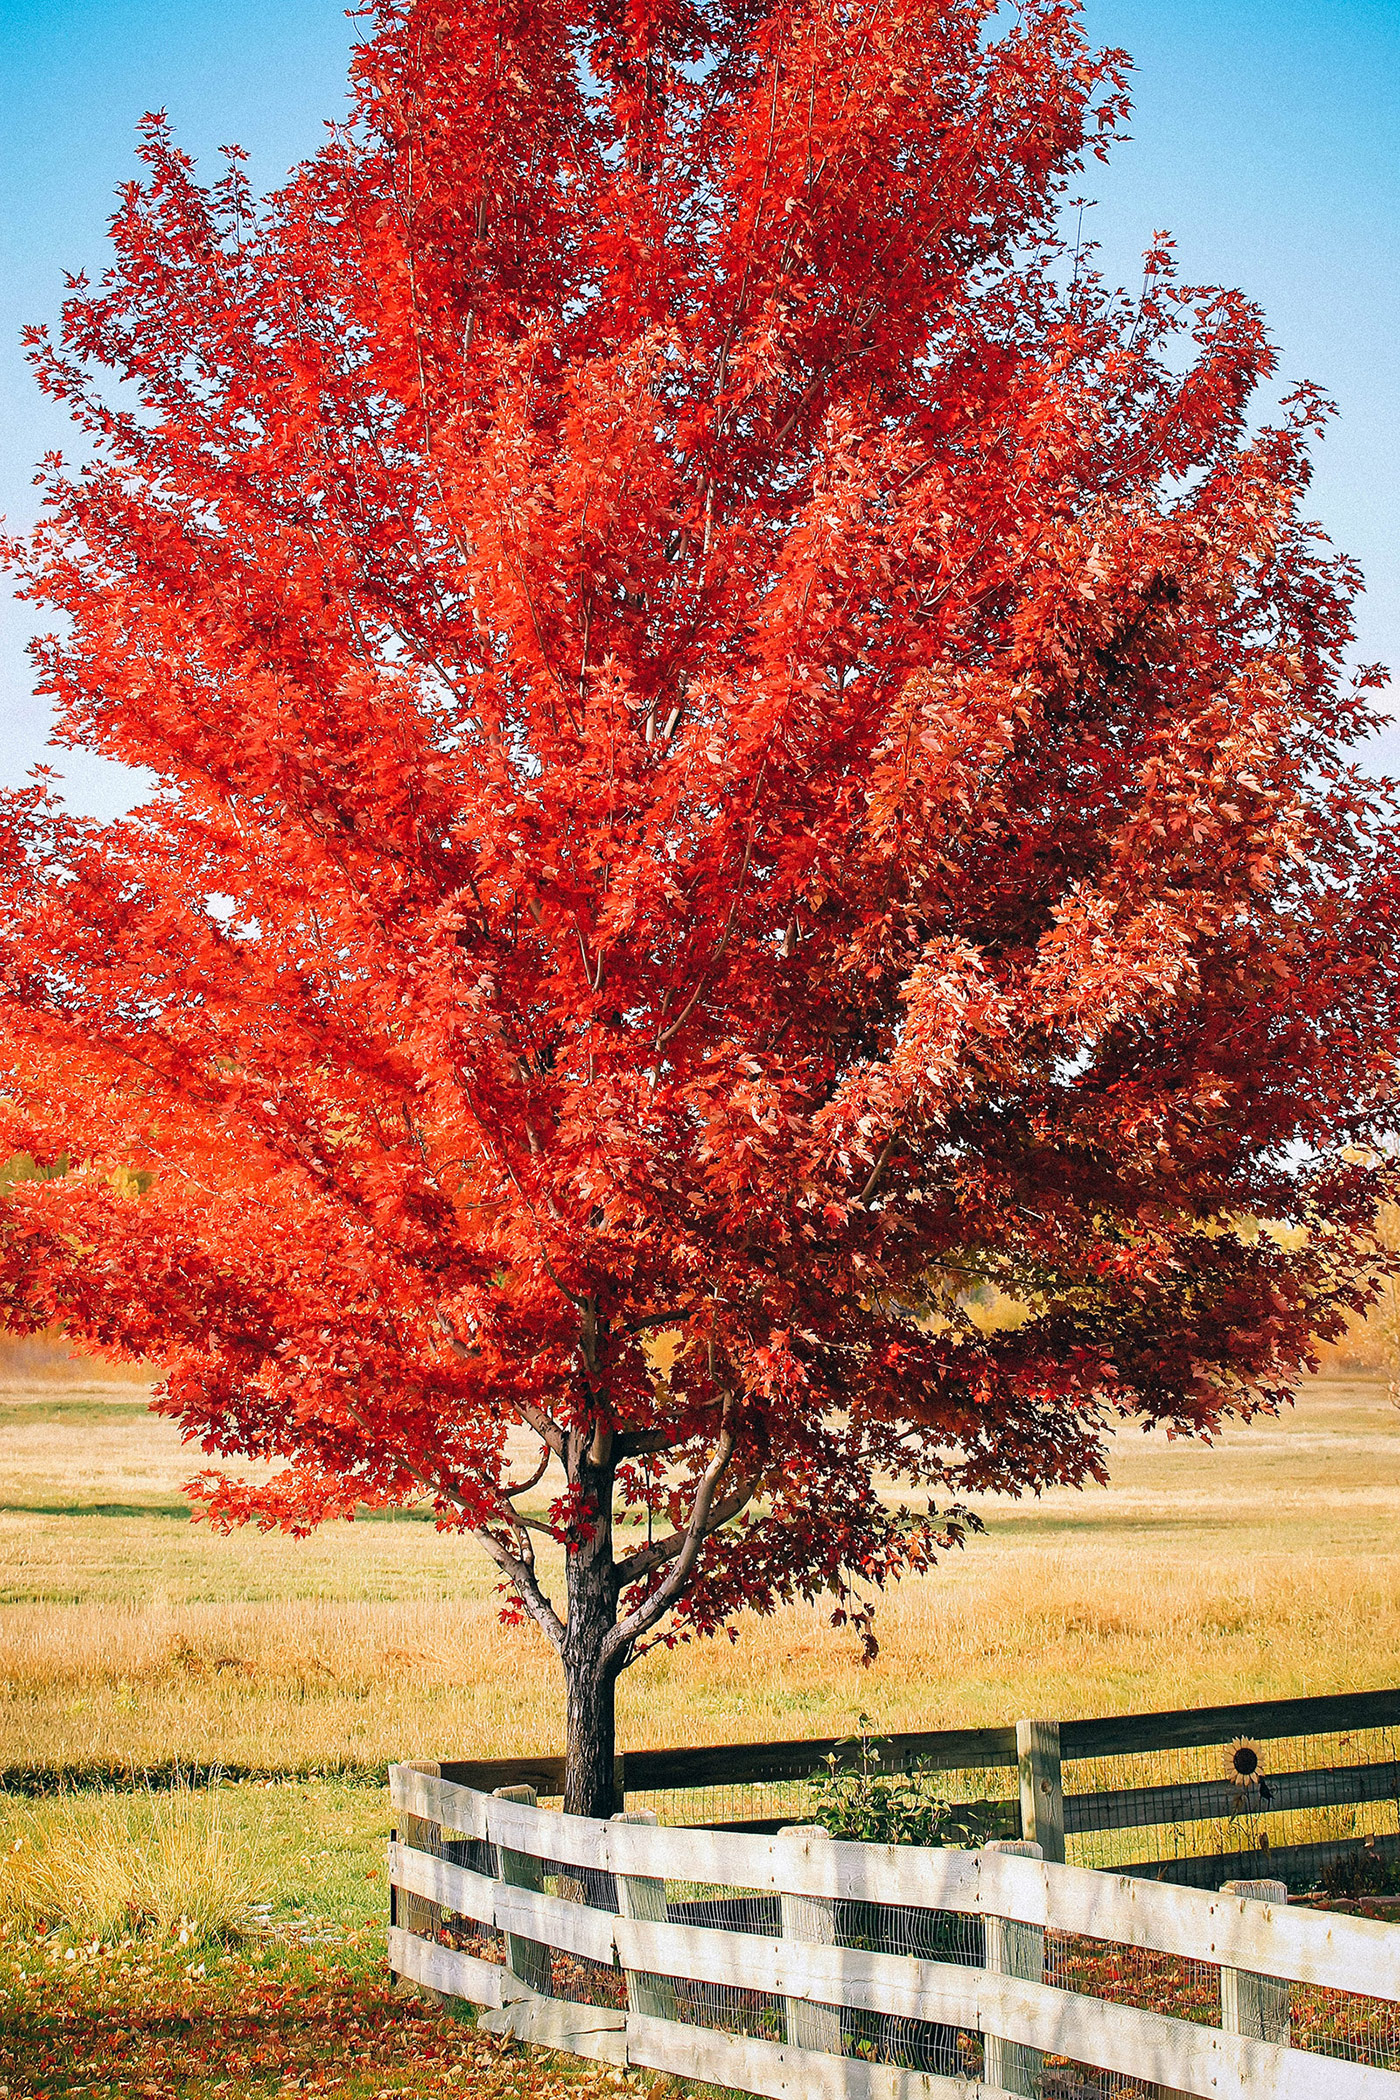 Fast-growing mature maple tree in fall with red leaves growing in a rural grassy yard